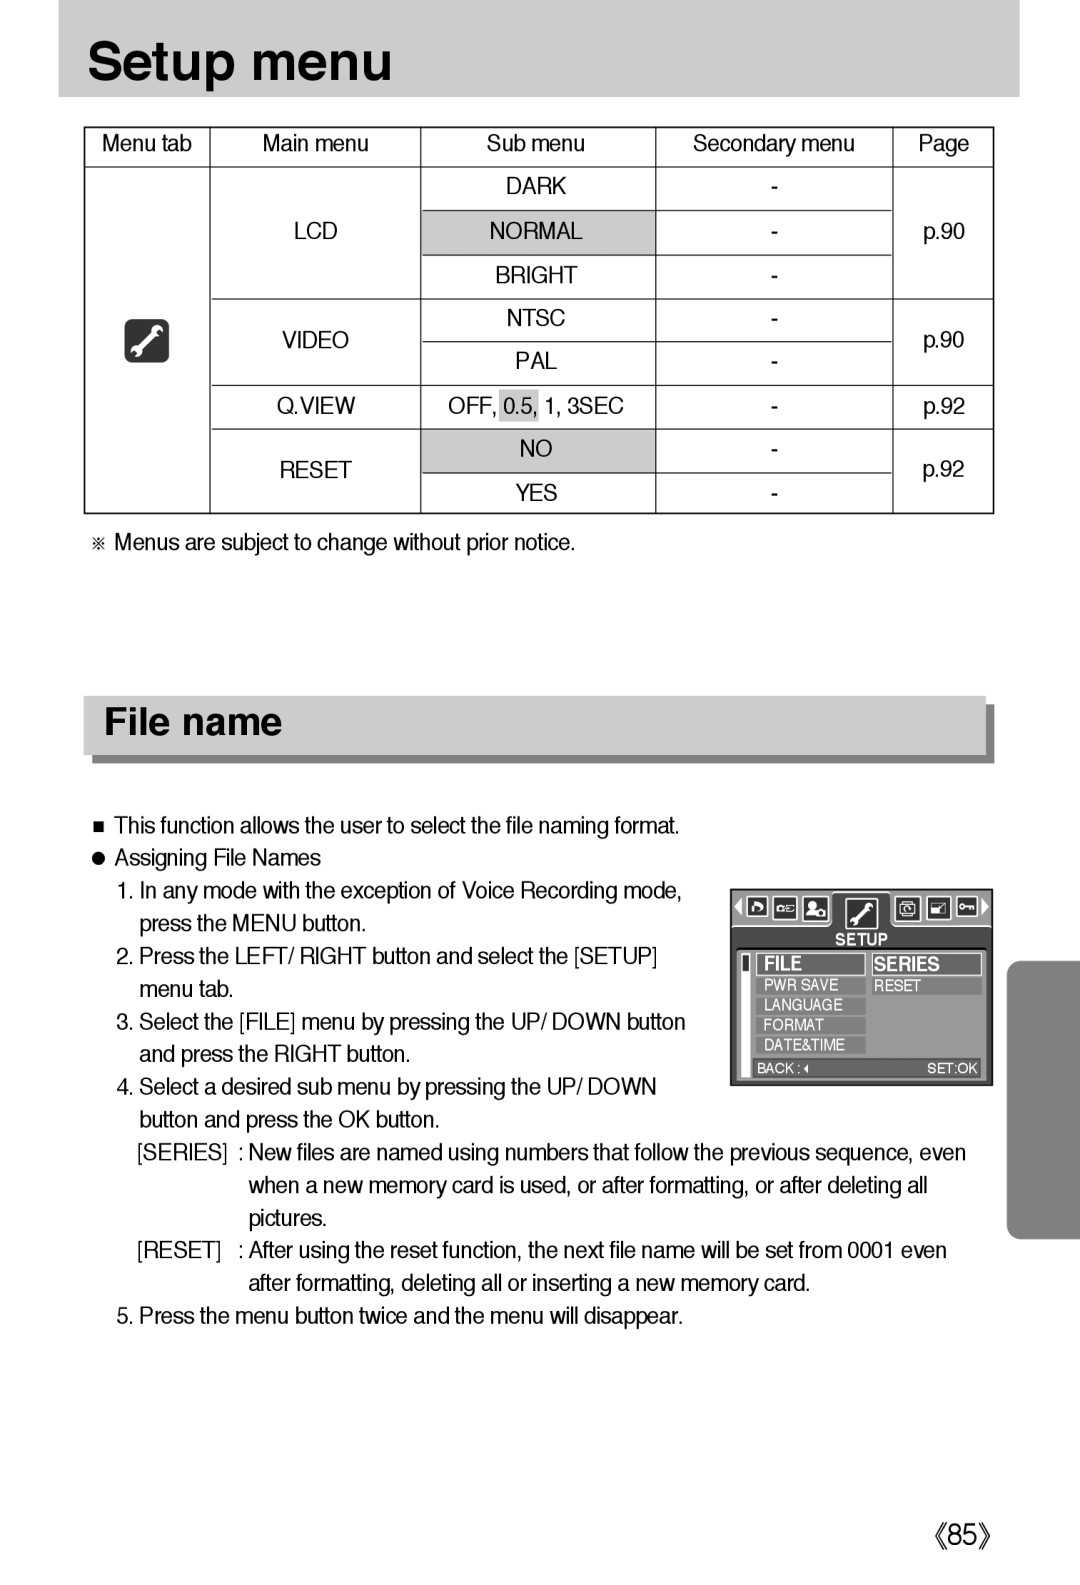 Samsung L50 user manual File name, 《85》, press the MENU button, Press the LEFT/ RIGHT button and select the SETUP, menu tab 